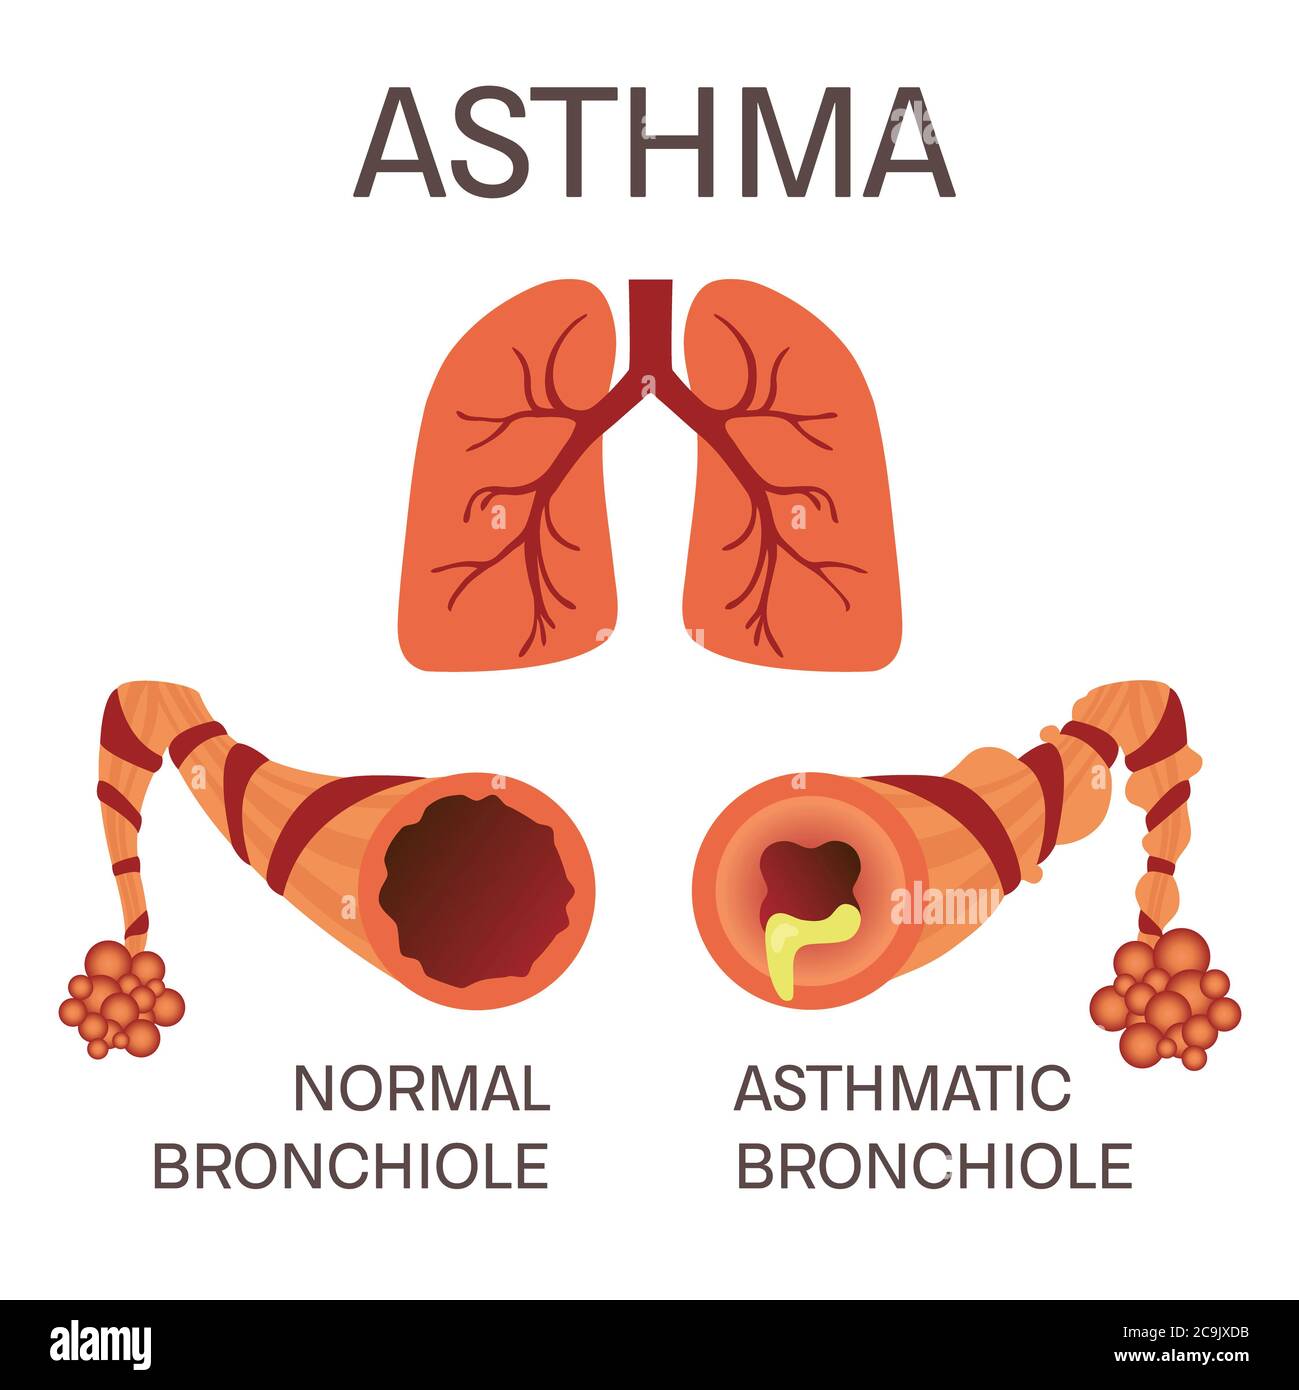 Normal and asthmatic bronchioles, illustration. Stock Photo